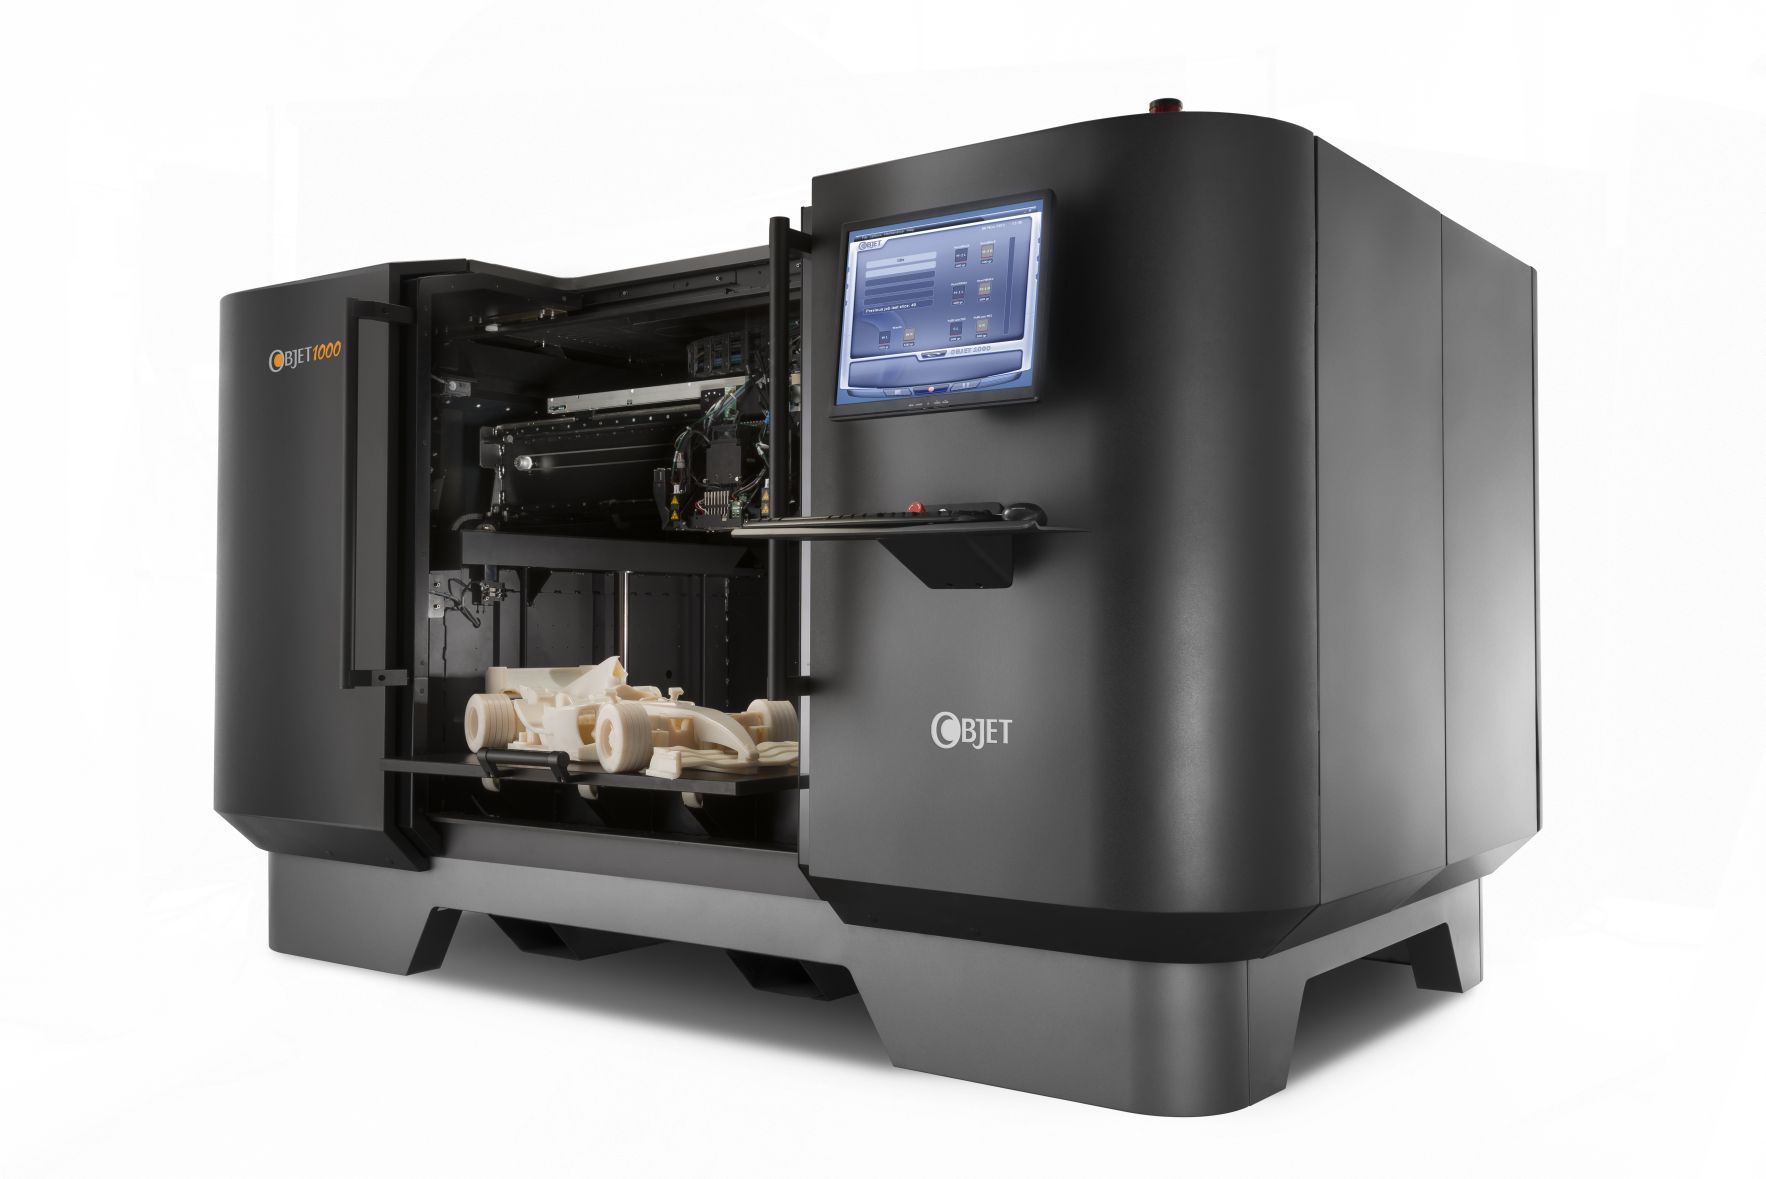 3D Printing: Employment Boom or Employment Swoon? - 3DPrint.